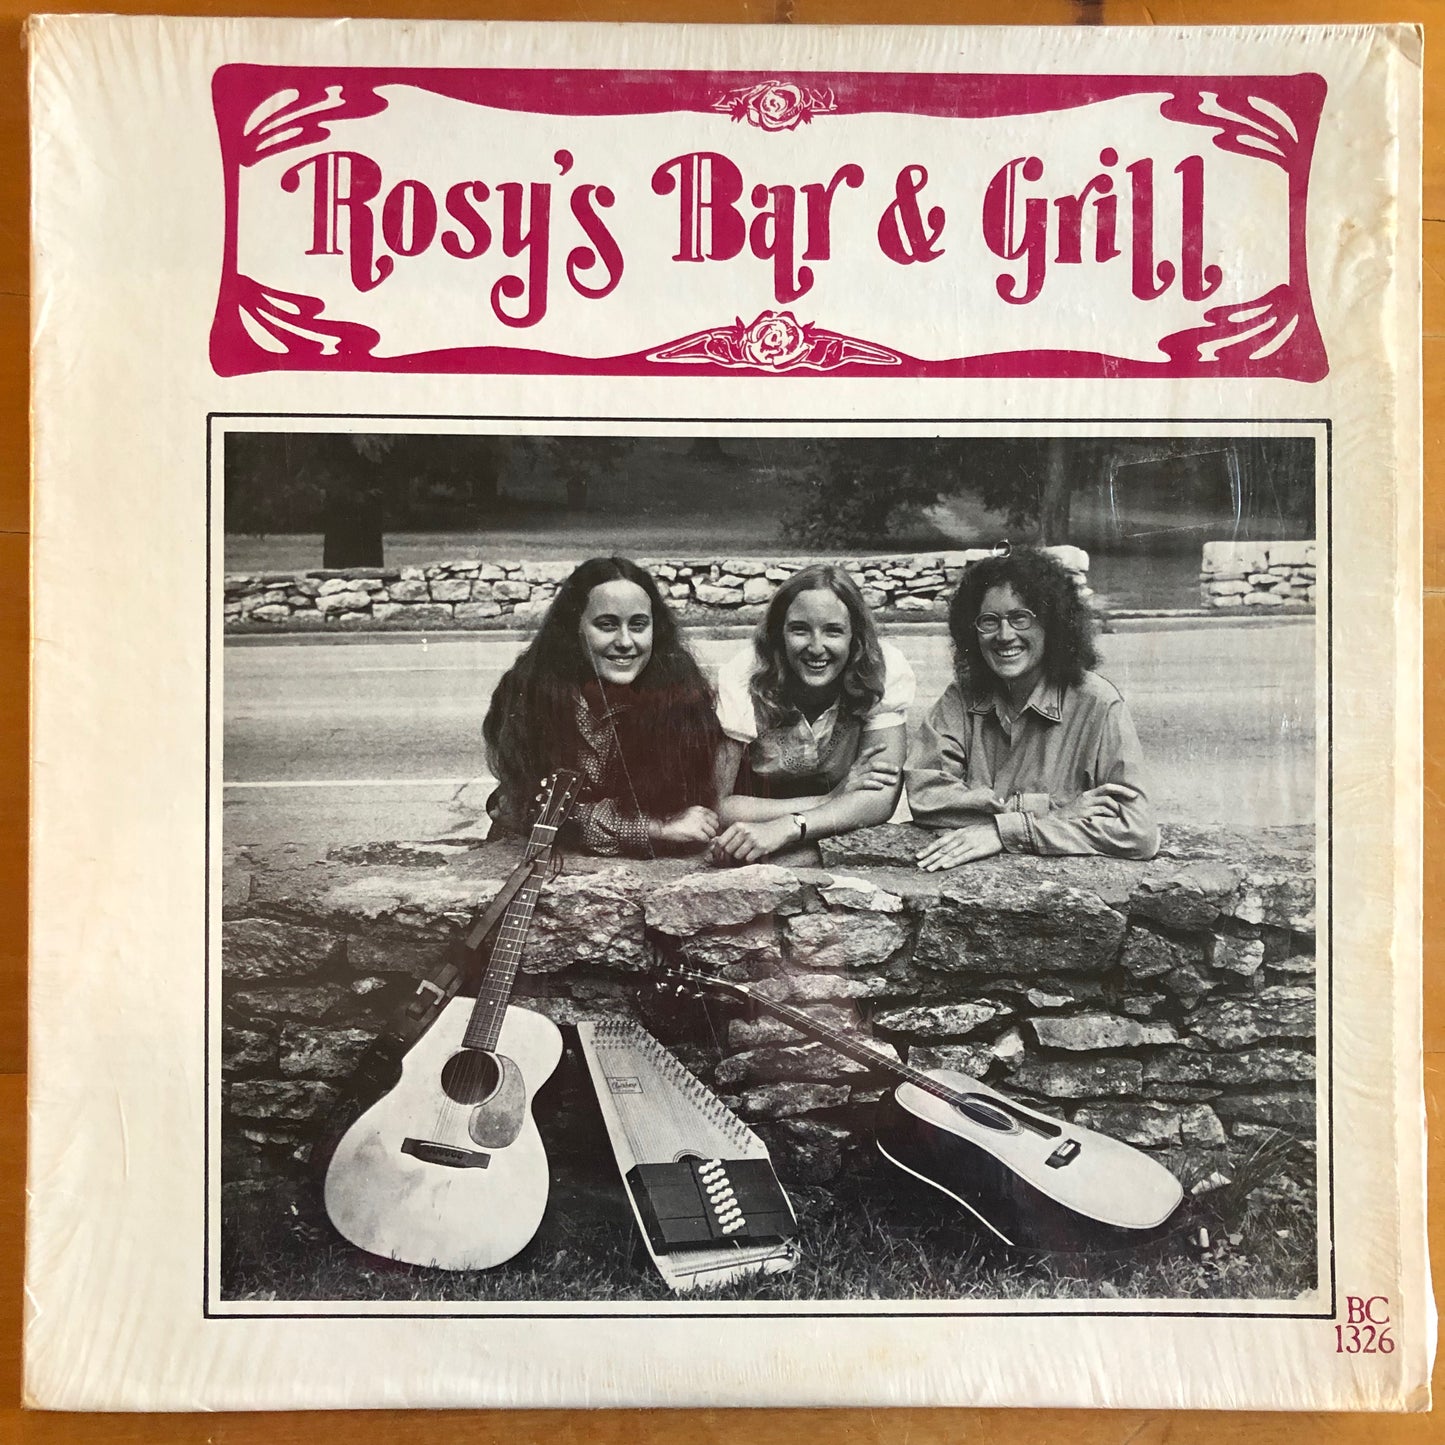 Rosy's Bar & Grill - Rosy's Bar & Grill